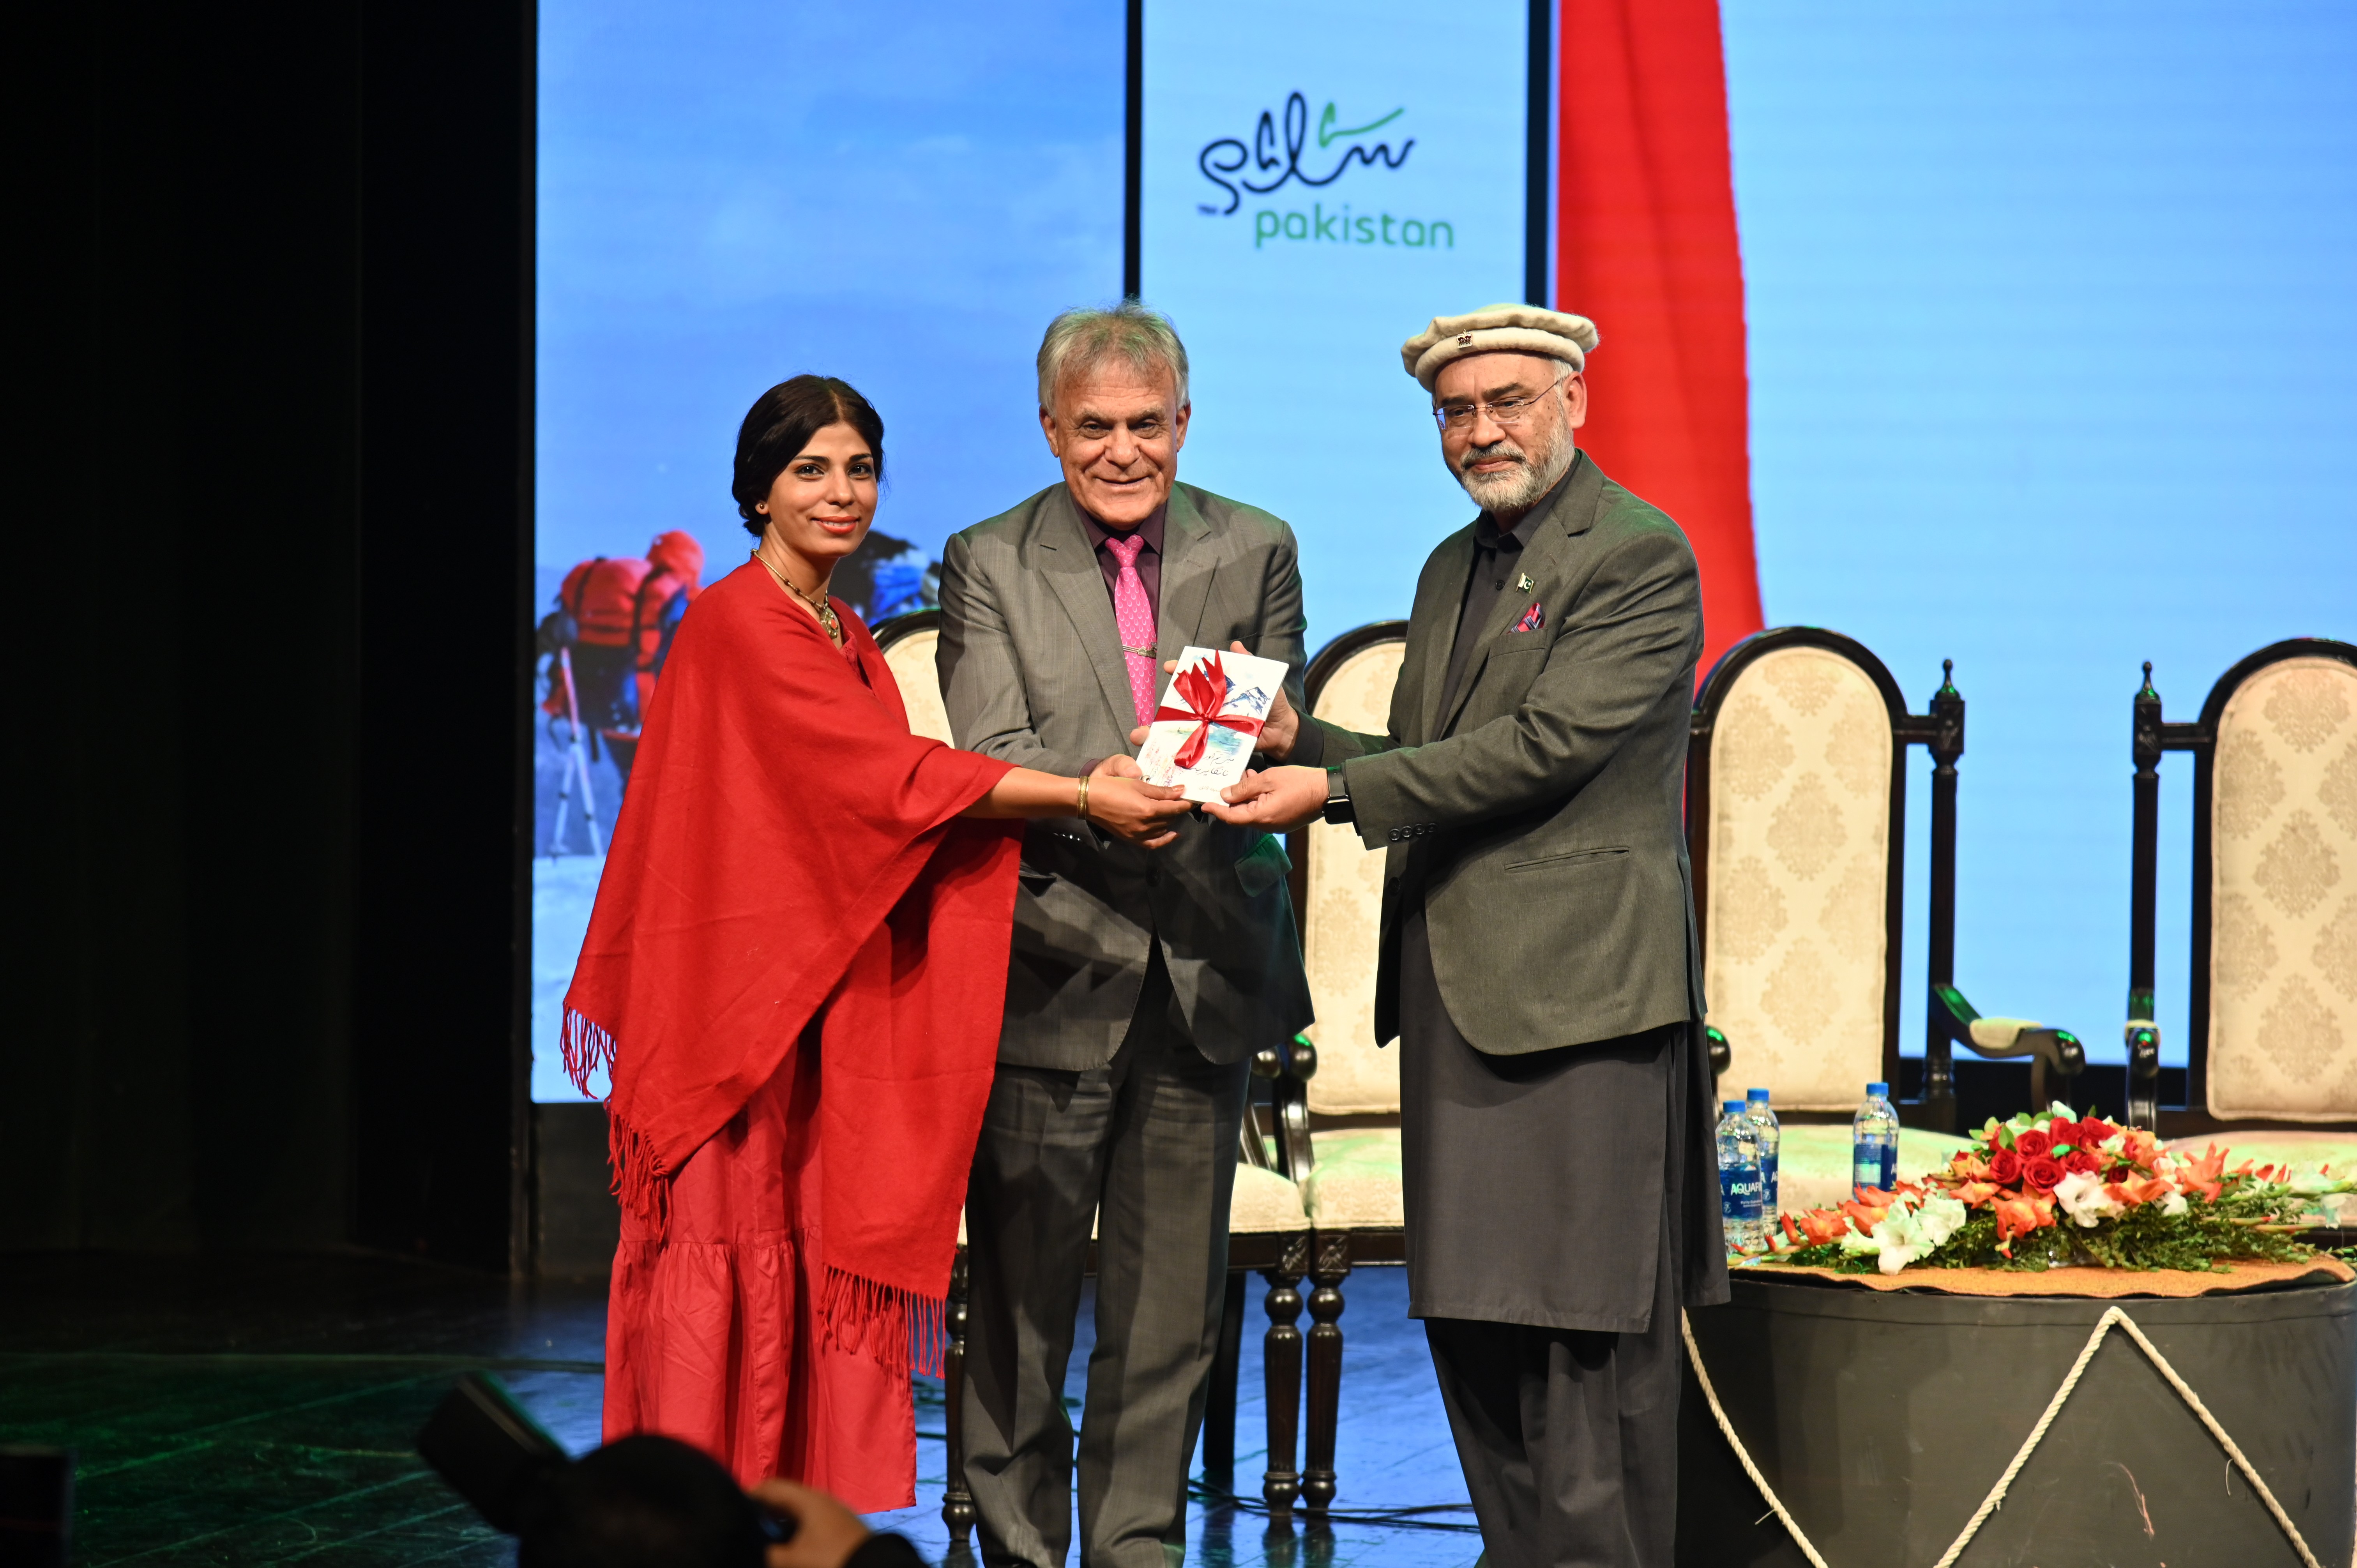 A book being presented to the chief guest